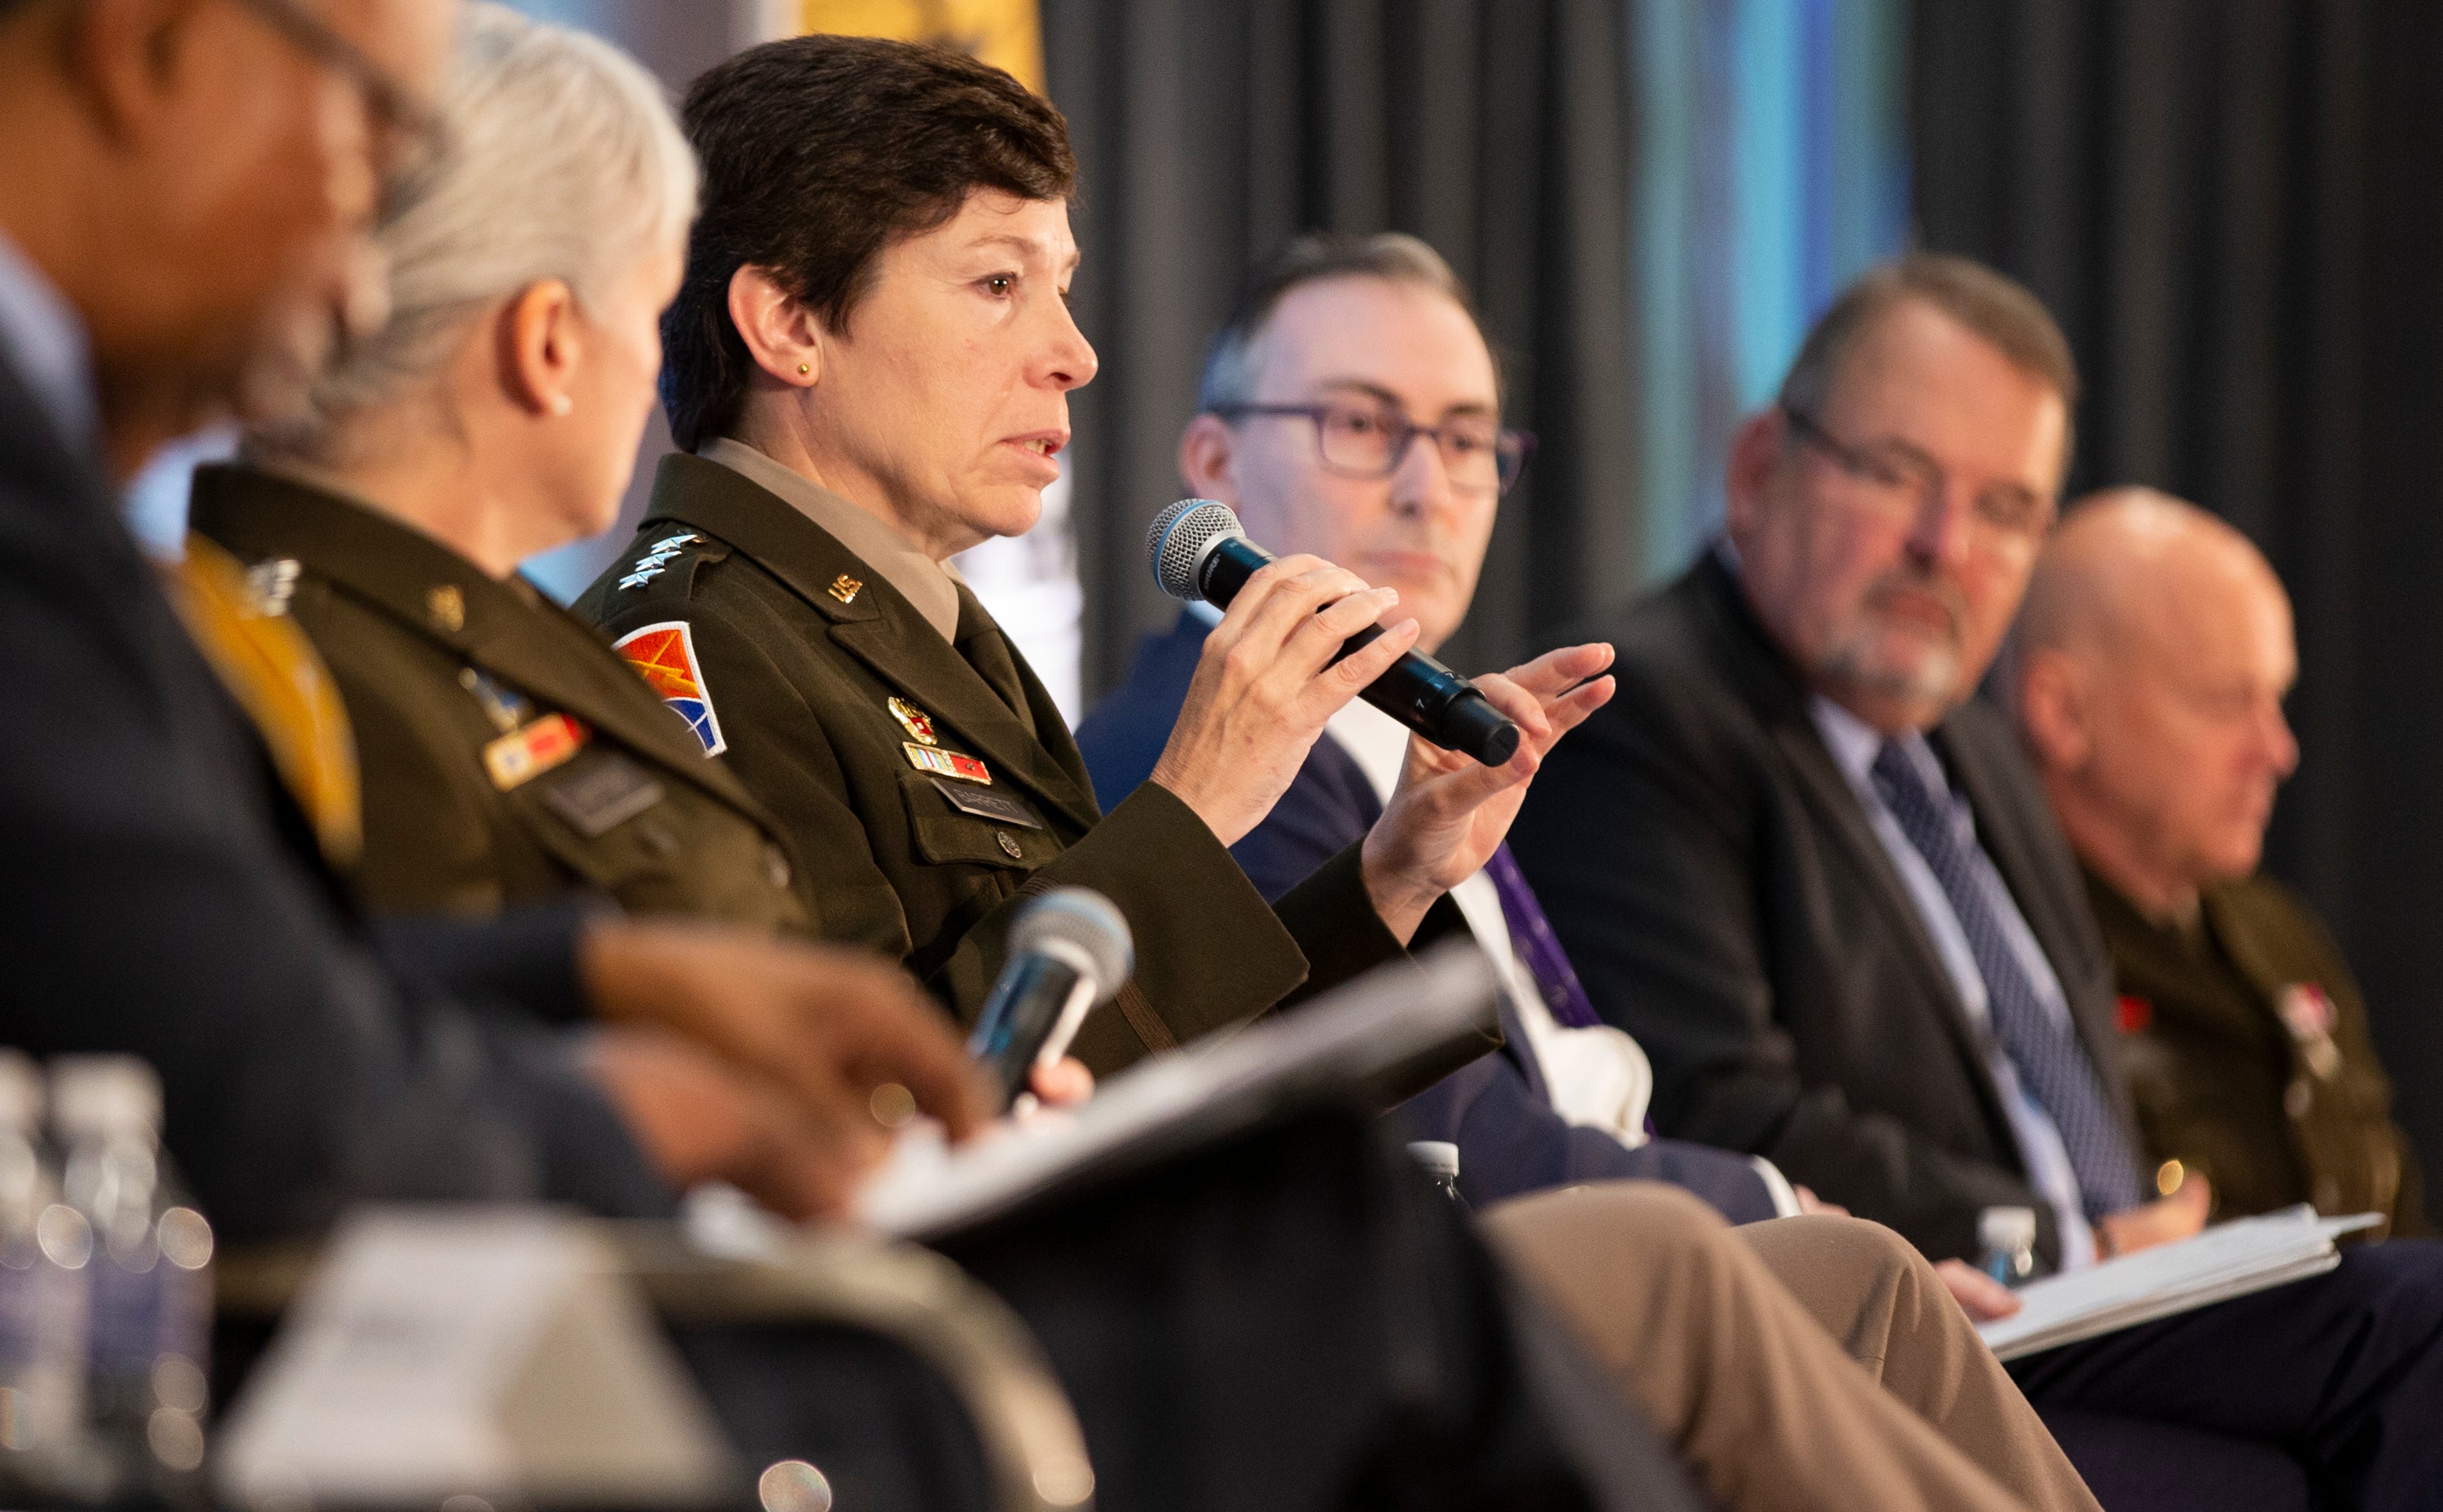 Lt. Gen. Maria Barrett, commanding general of US Army Cyber Command speaks during the AUSA Contemporary Military Forum: Evolution of Cyber and Information Advantage at AUSA 2022 Annual Meeting in Washington, D.C., Wednesday, Oct. 12, 2022. (Jen Milbrett for AUSA)